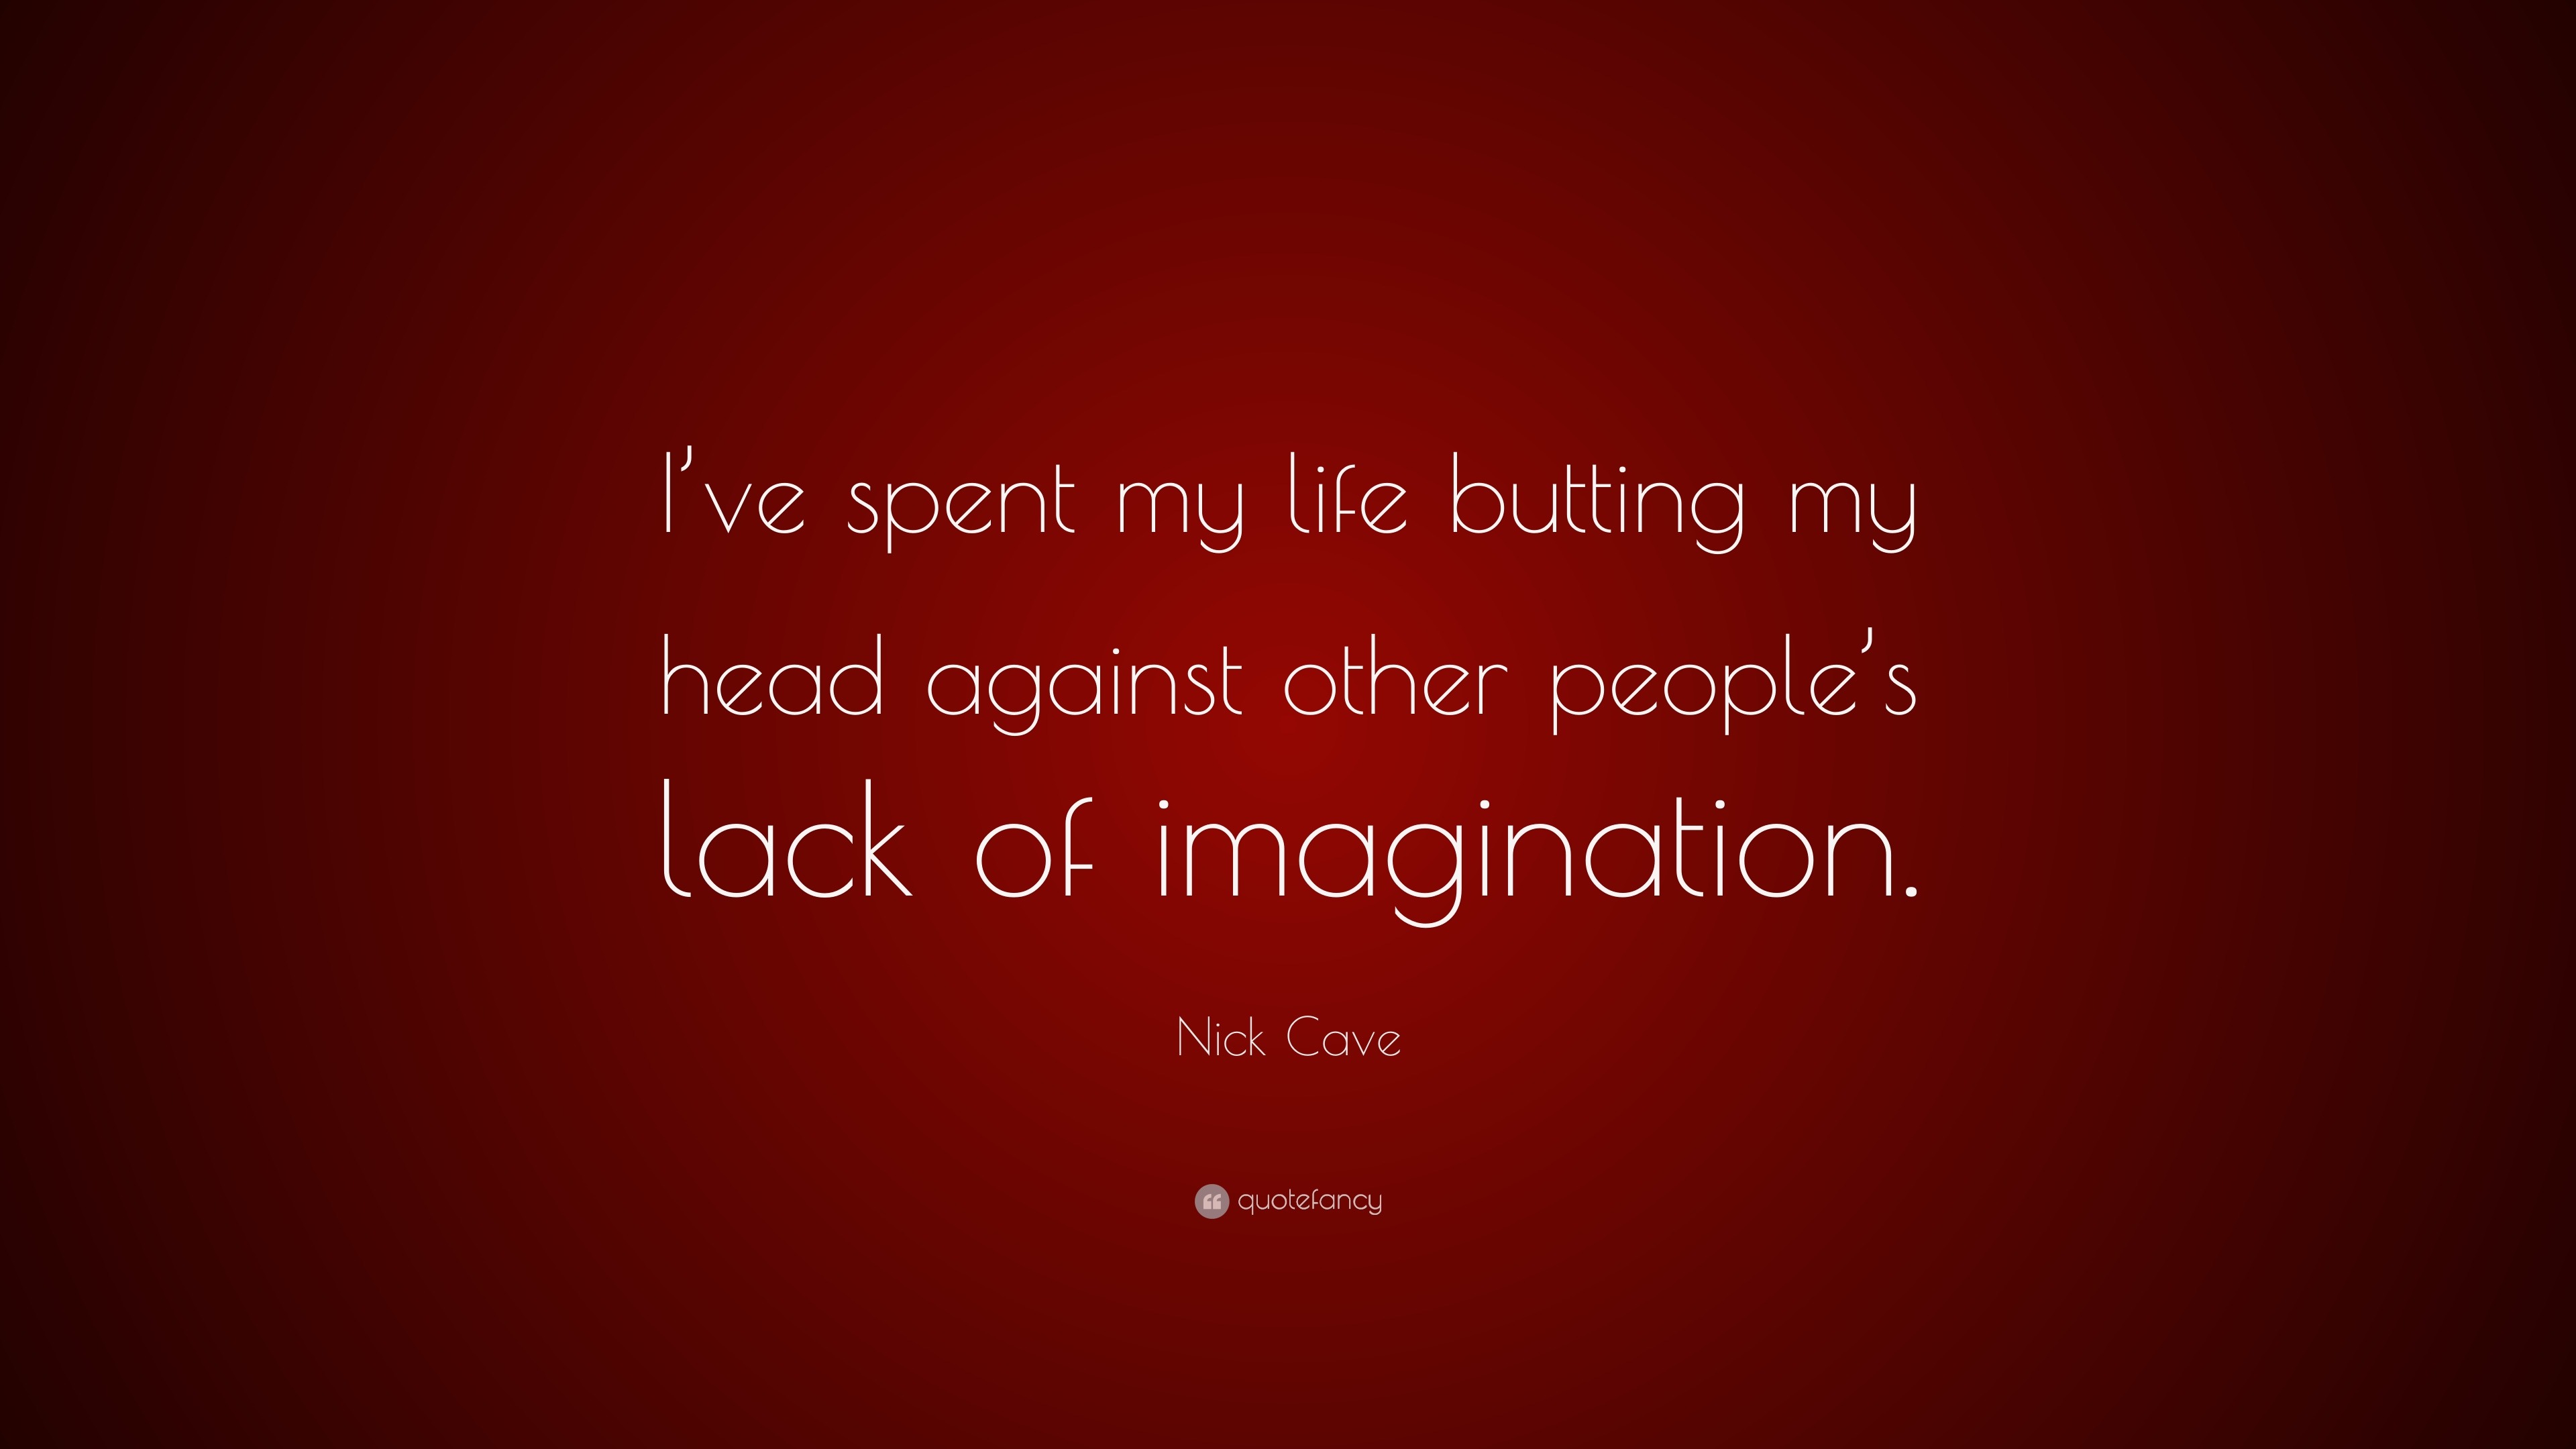 Nick Cave Quote: "I've spent my life butting my head ...